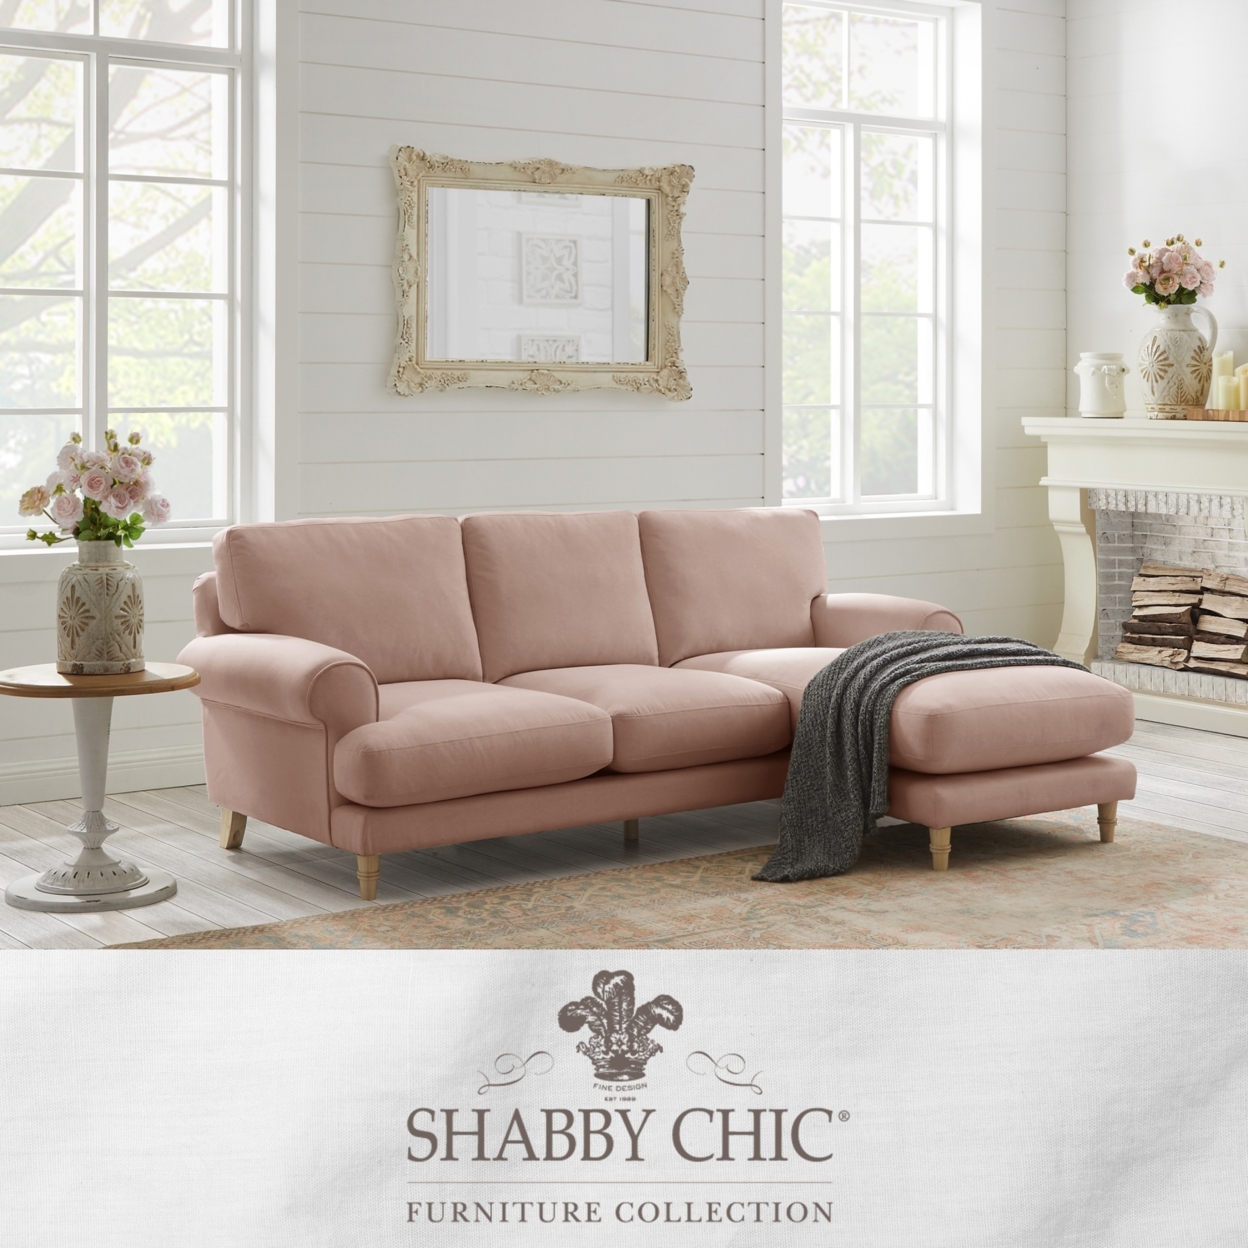 Denisse Sofa-Upholstered-Sinuous Spring-Round Arms - blush/linen